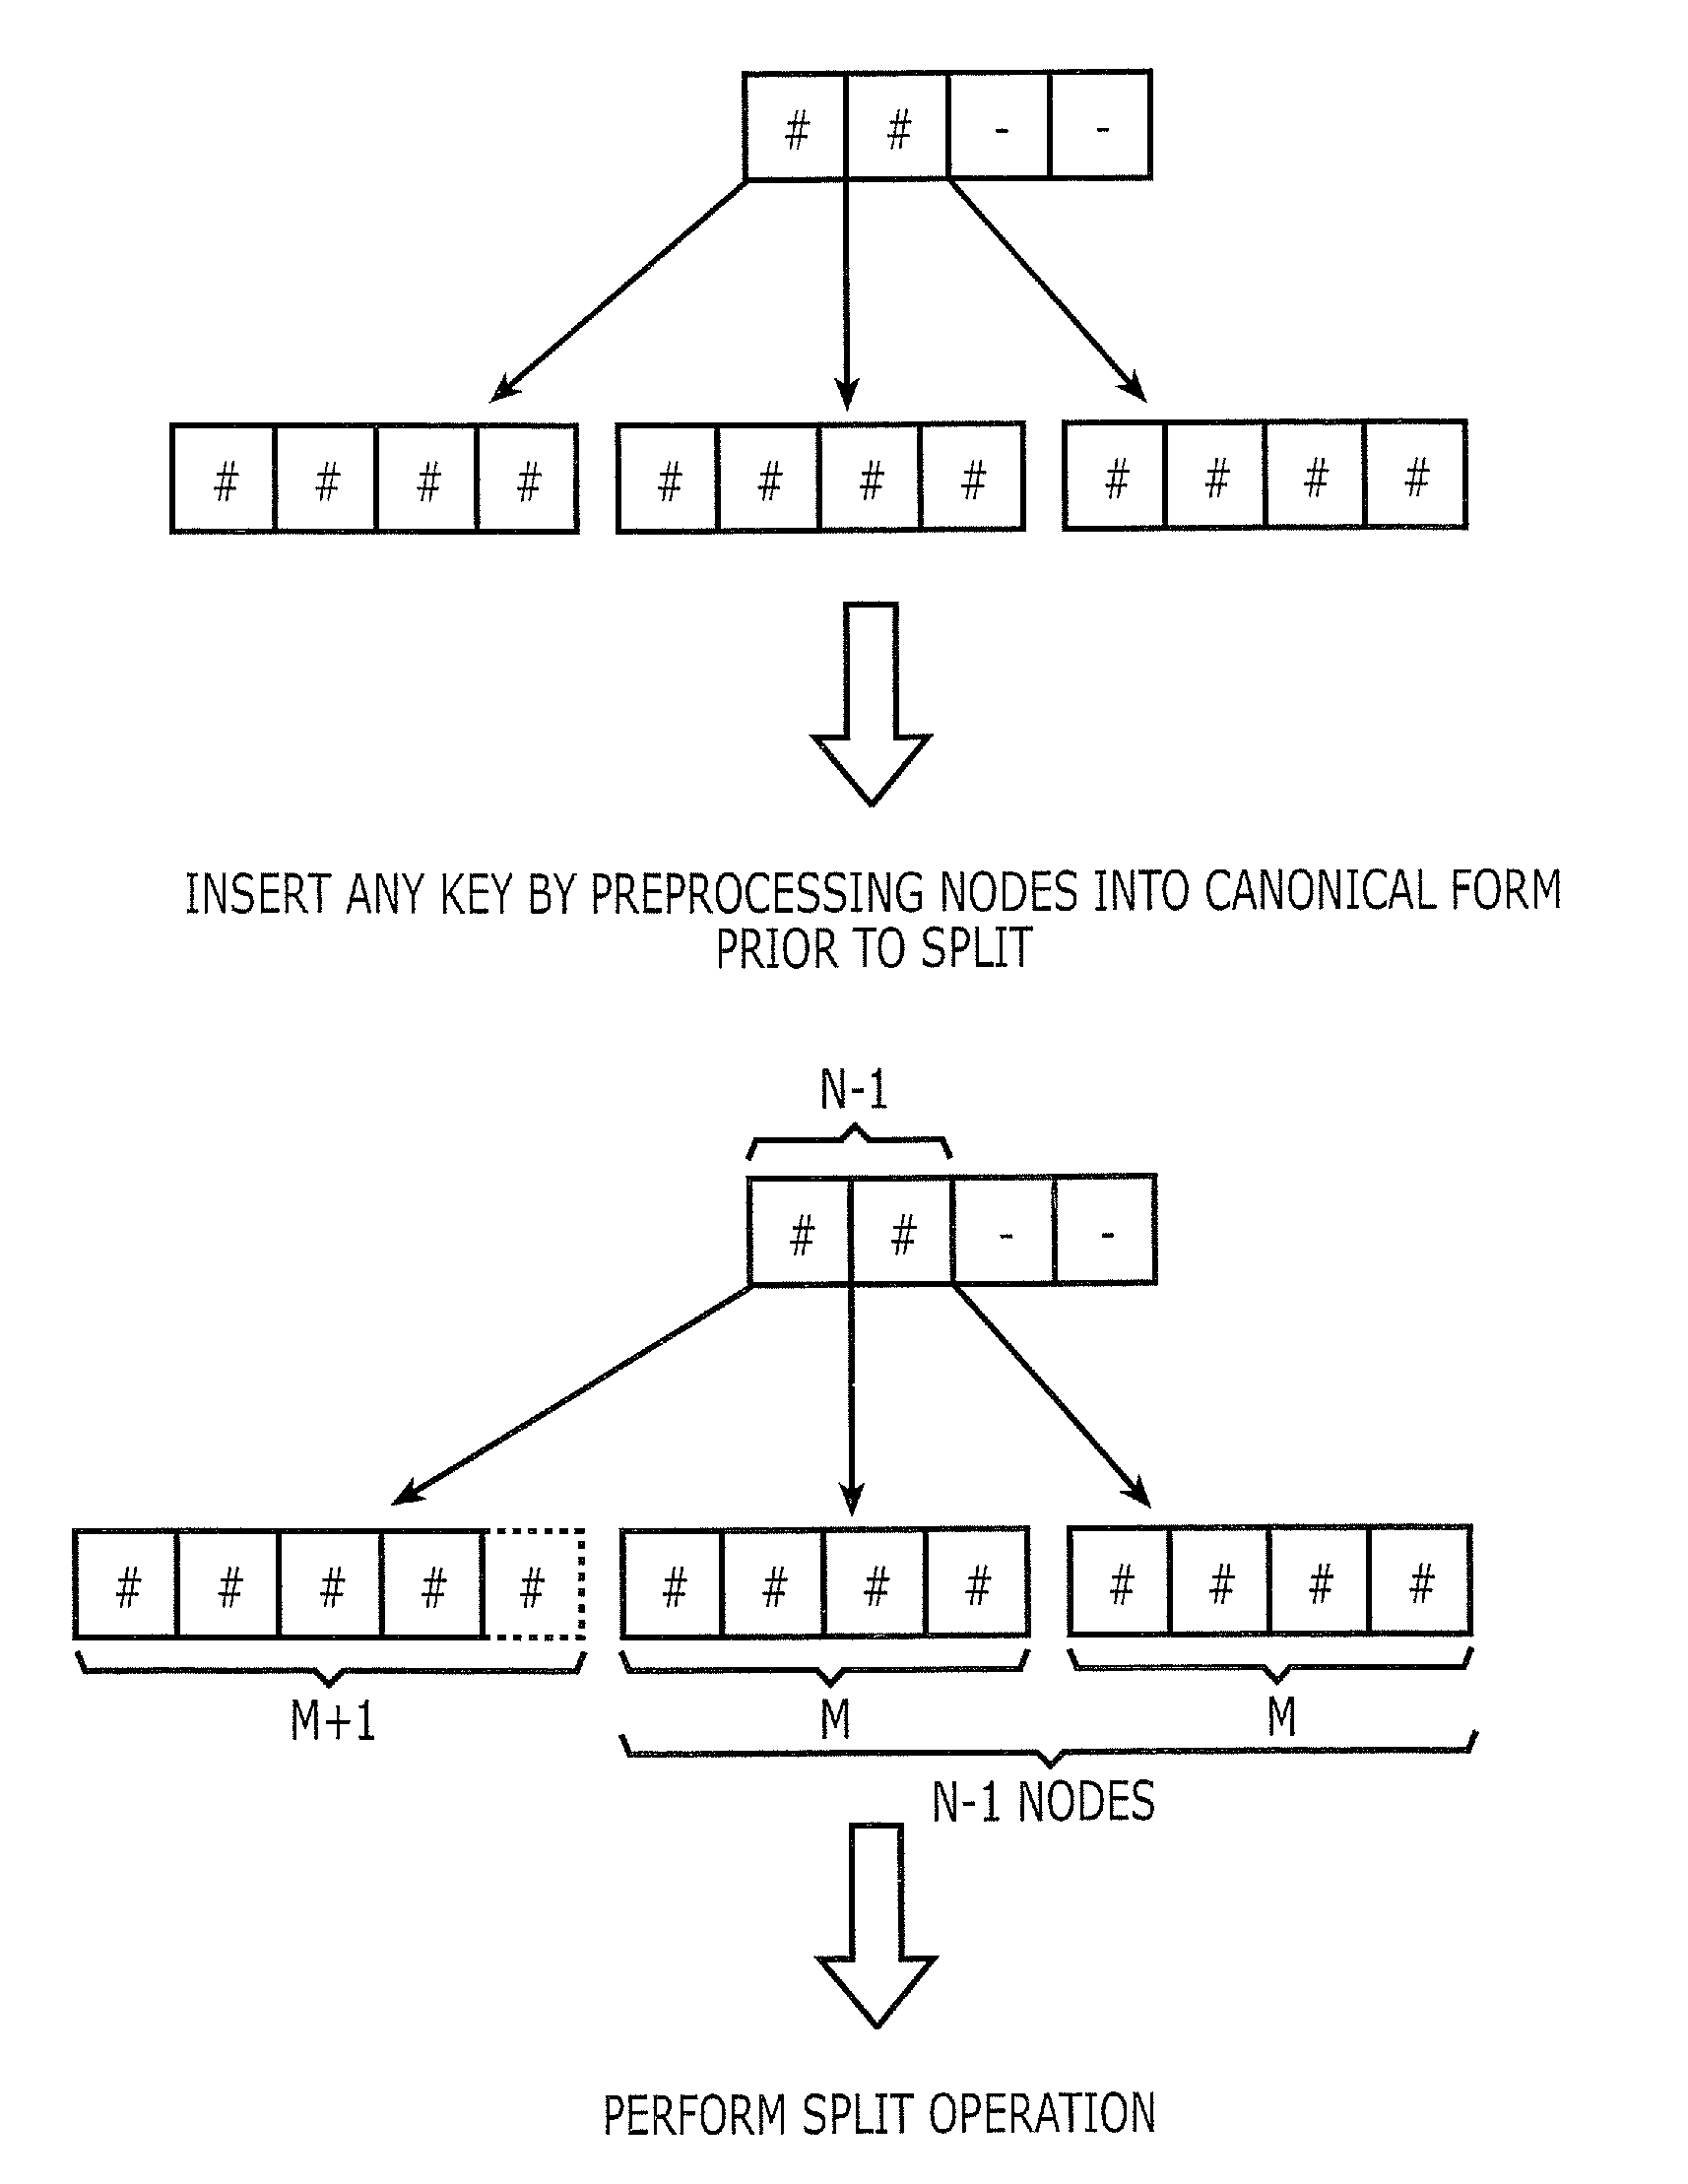 Integrated search engine devices and methods of updating same using node splitting and merging operations